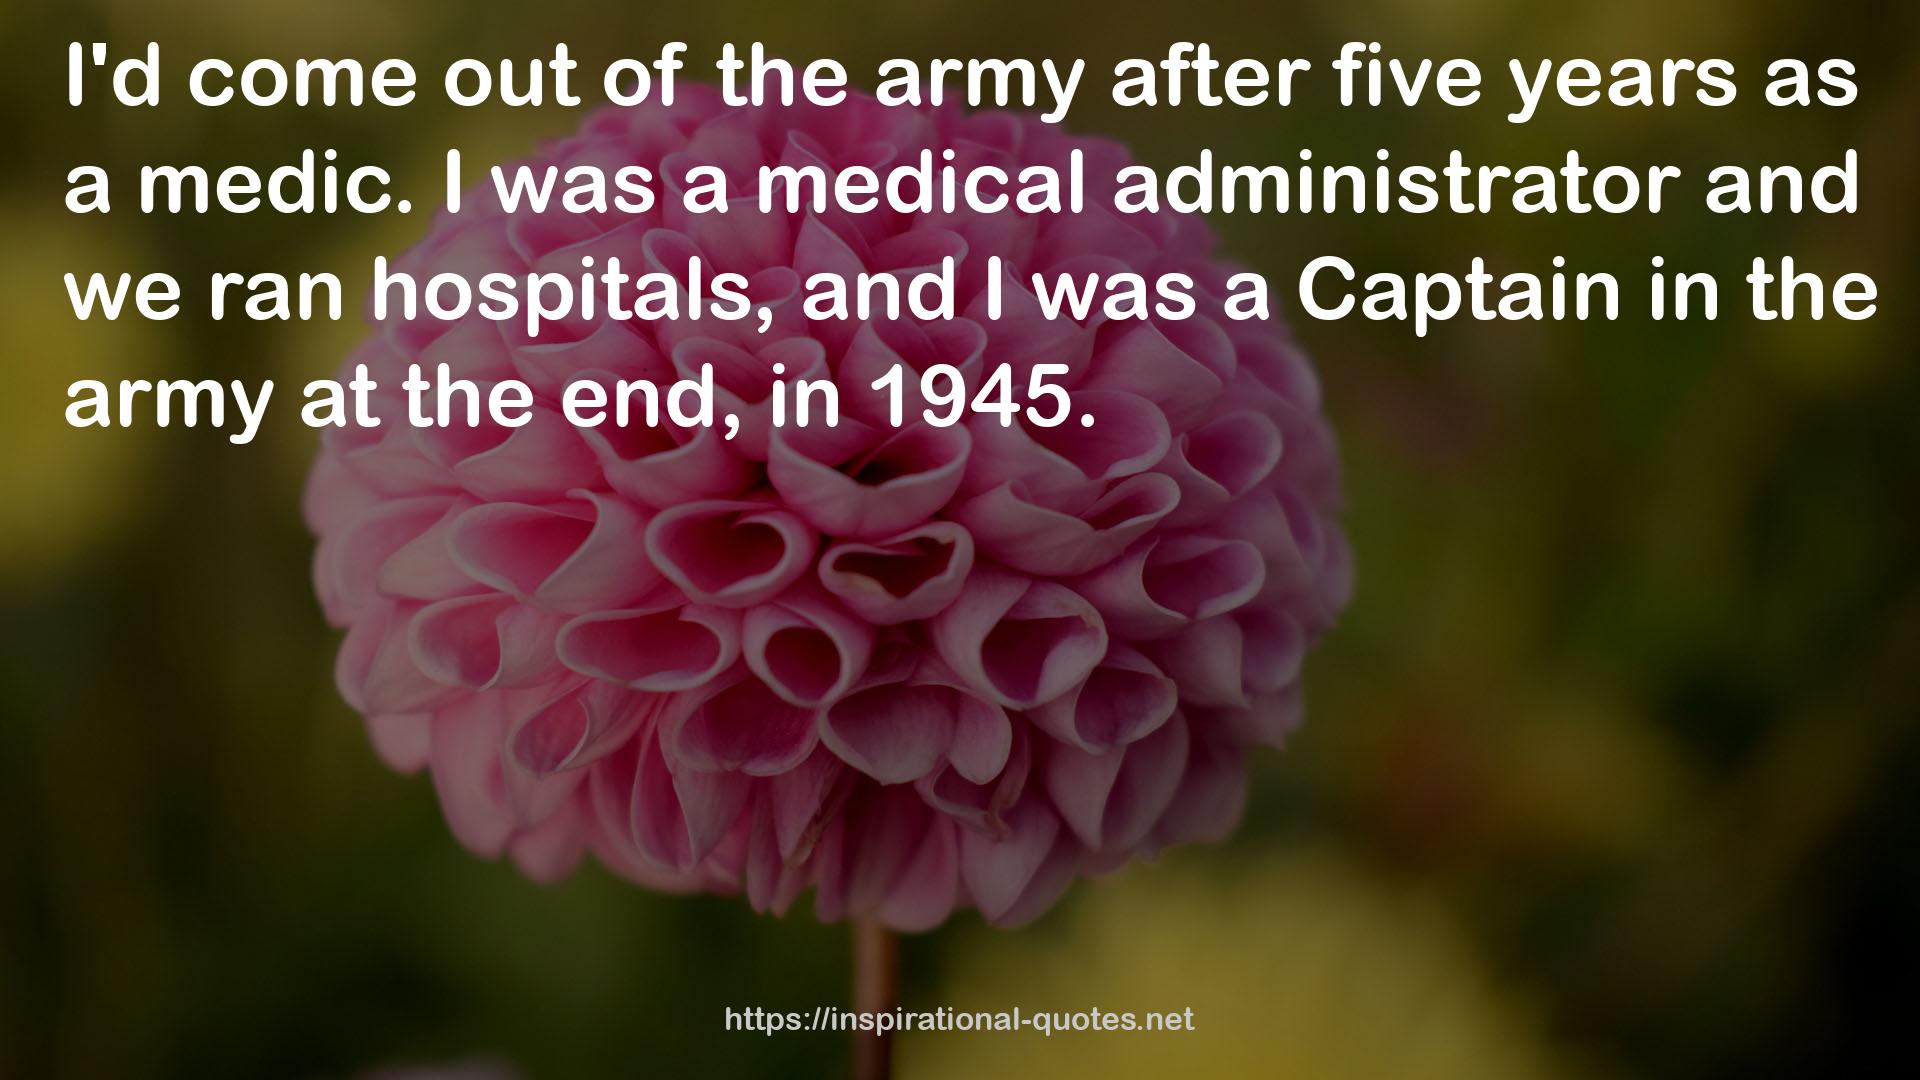 a medical administrator  QUOTES